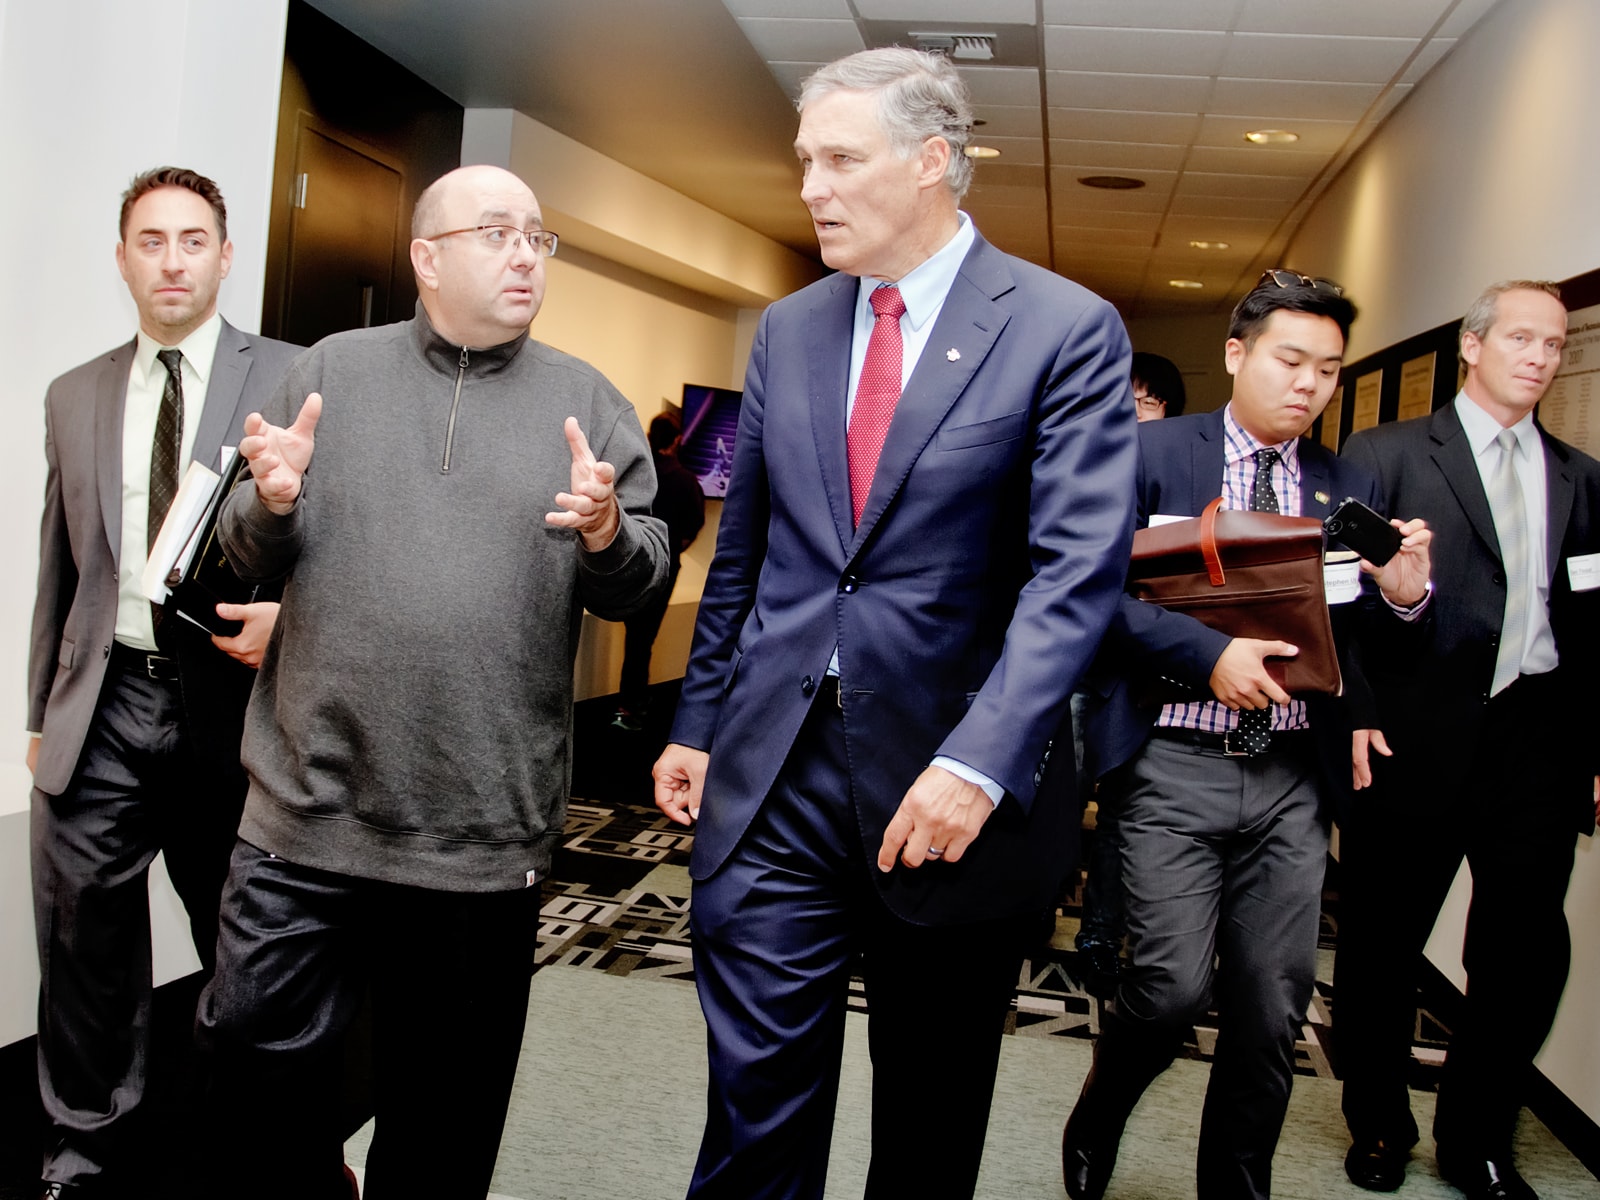 DigiPen founder Claude Comair and Washington Governor Jay Inslee walking down the hall surrounded by staffers